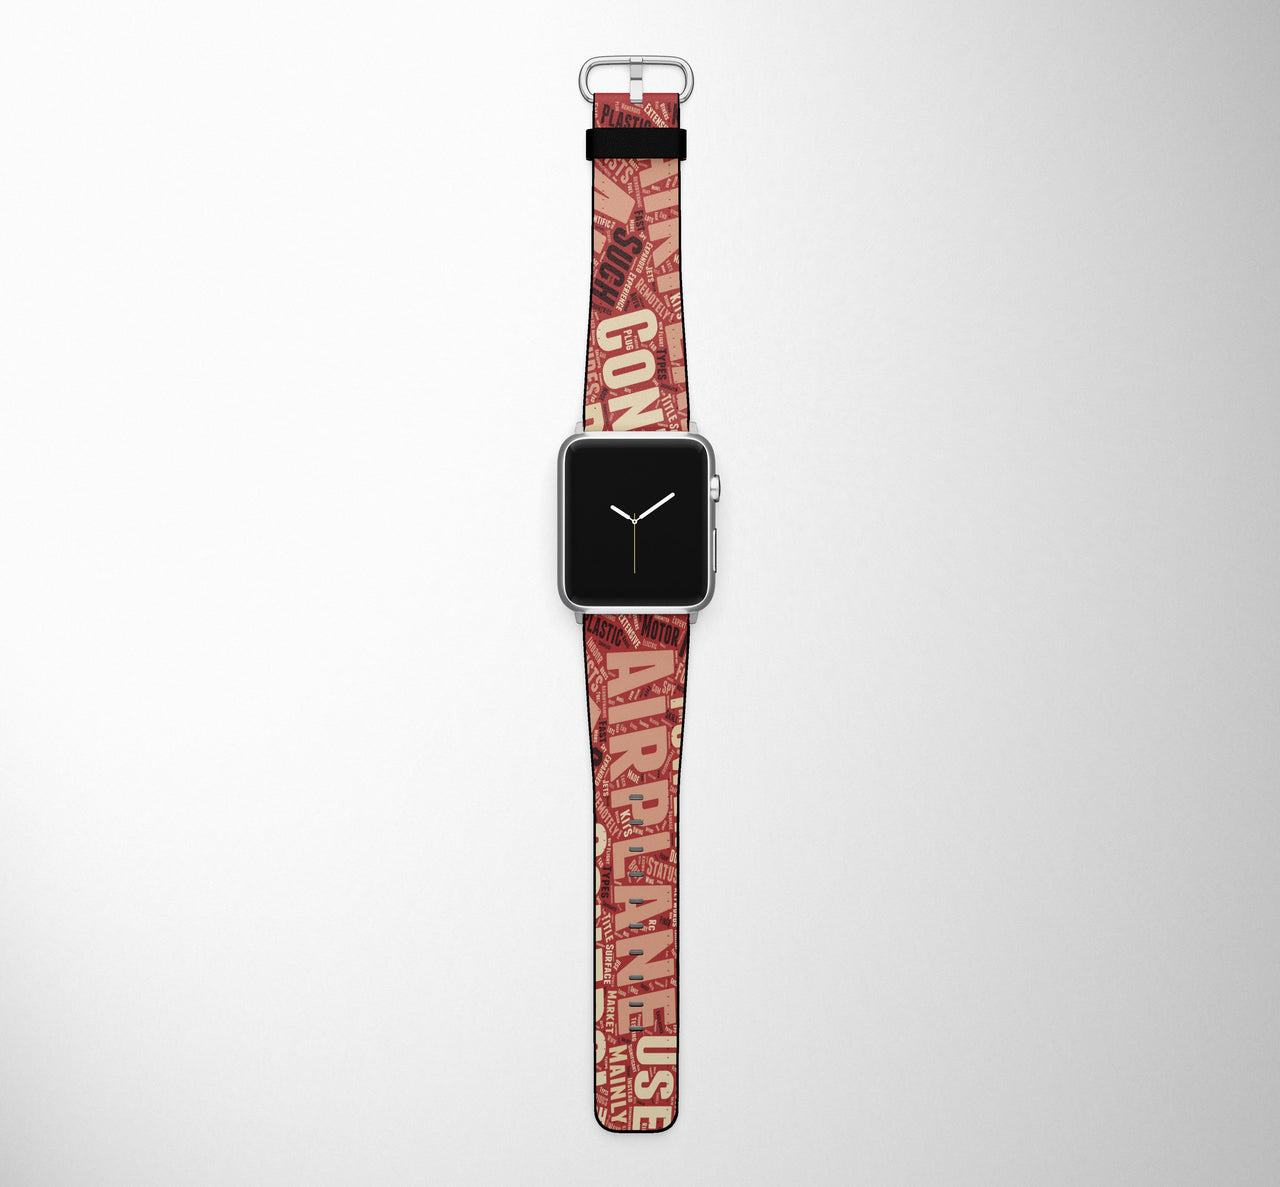 Mixed Aviation Texts Designed Leather Apple Watch Straps